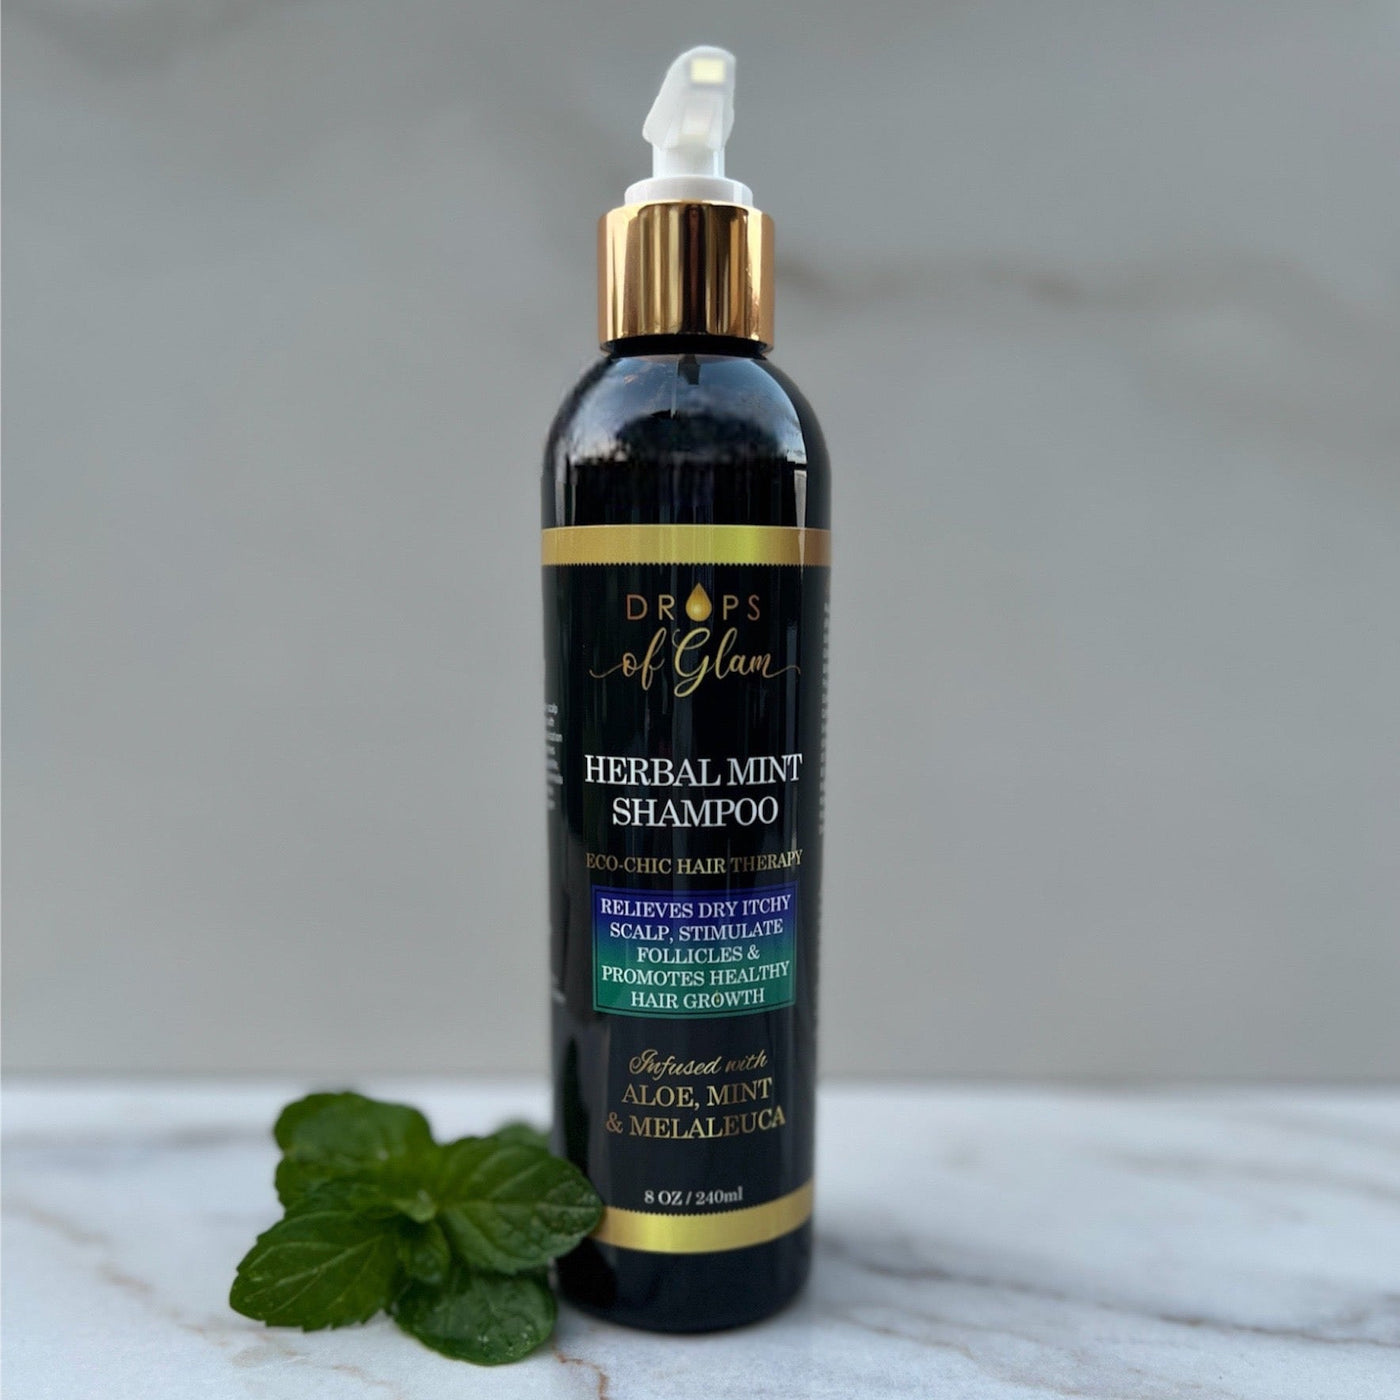 Herbal Mint Shampoo - Bundles and Drops of Glam